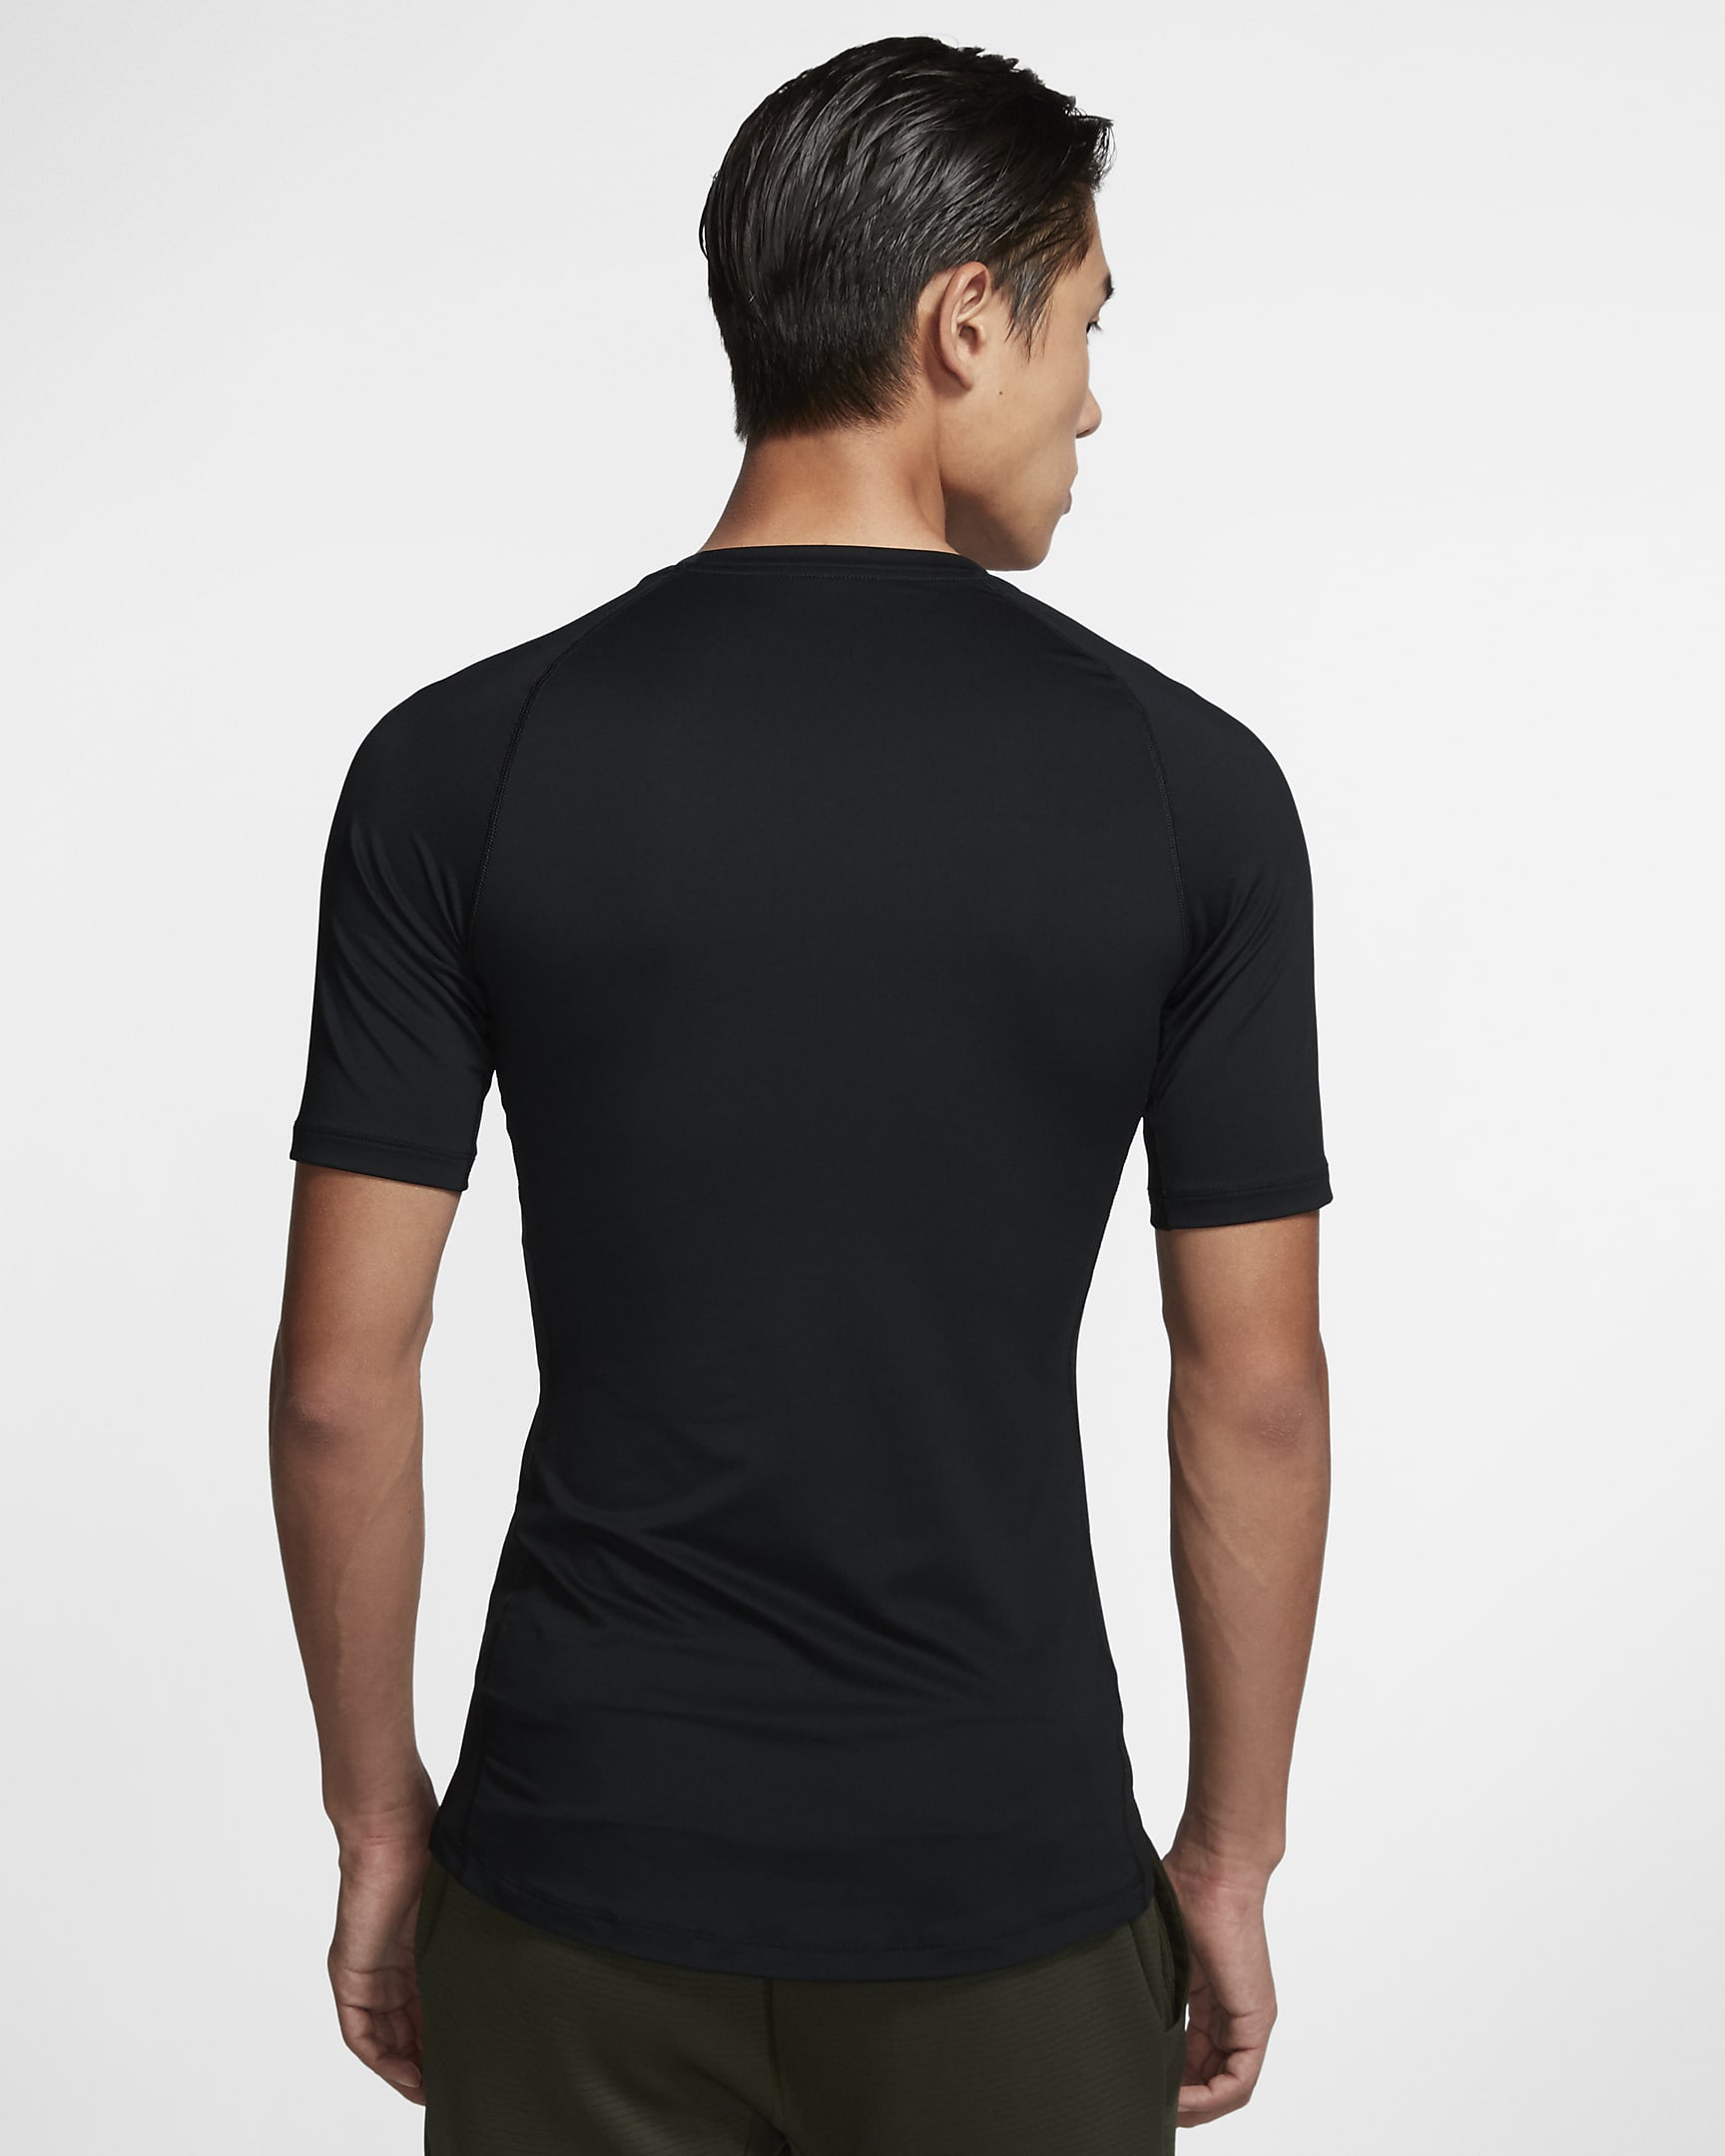 Nike Pro Men's Tight-Fit Short-Sleeve Top. Nike IN